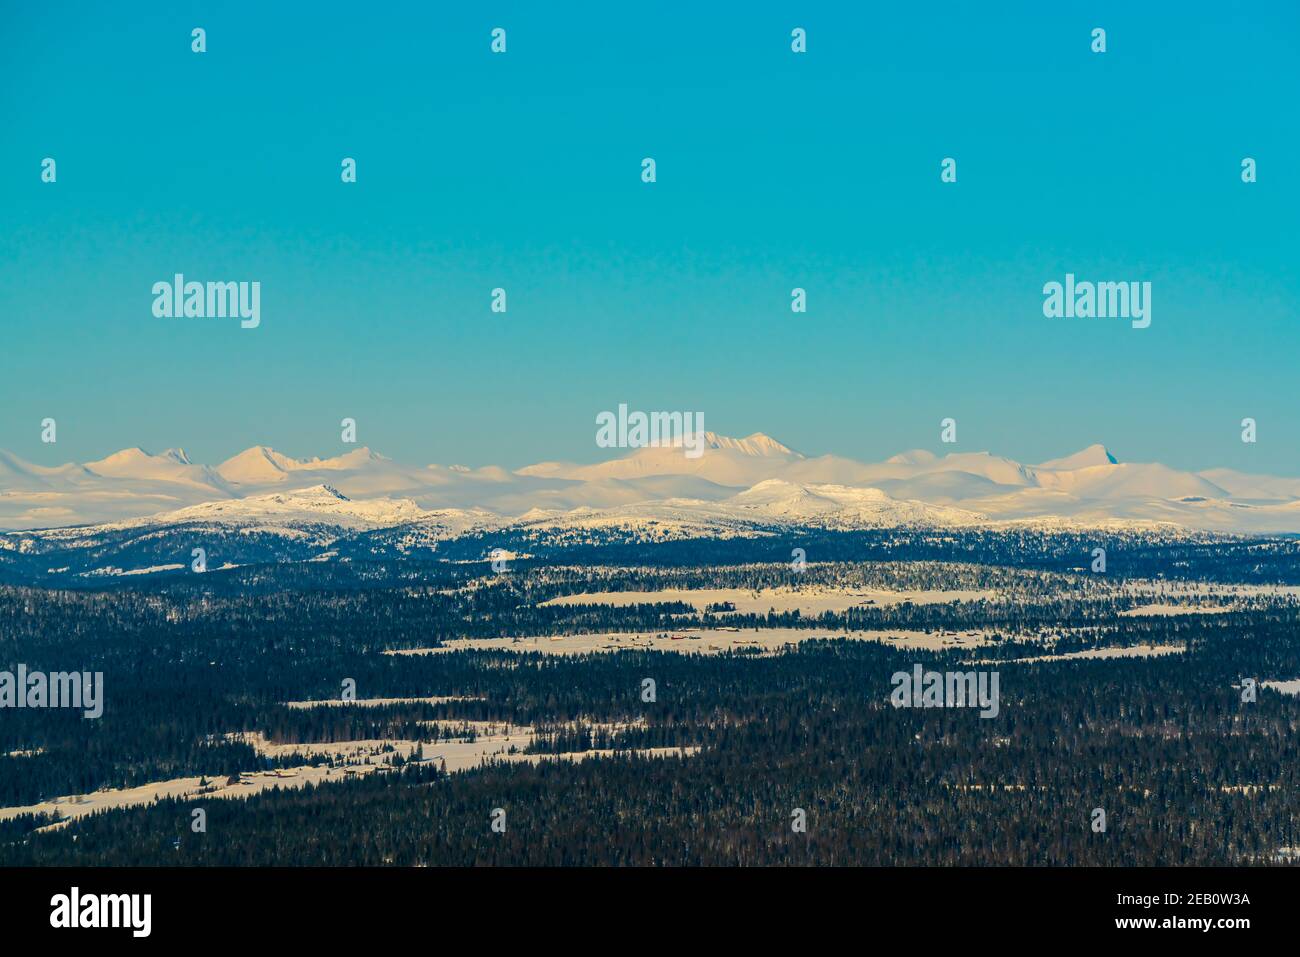 View over a majestic wilderness landscape in winter with clear blue skies. Stock Photo